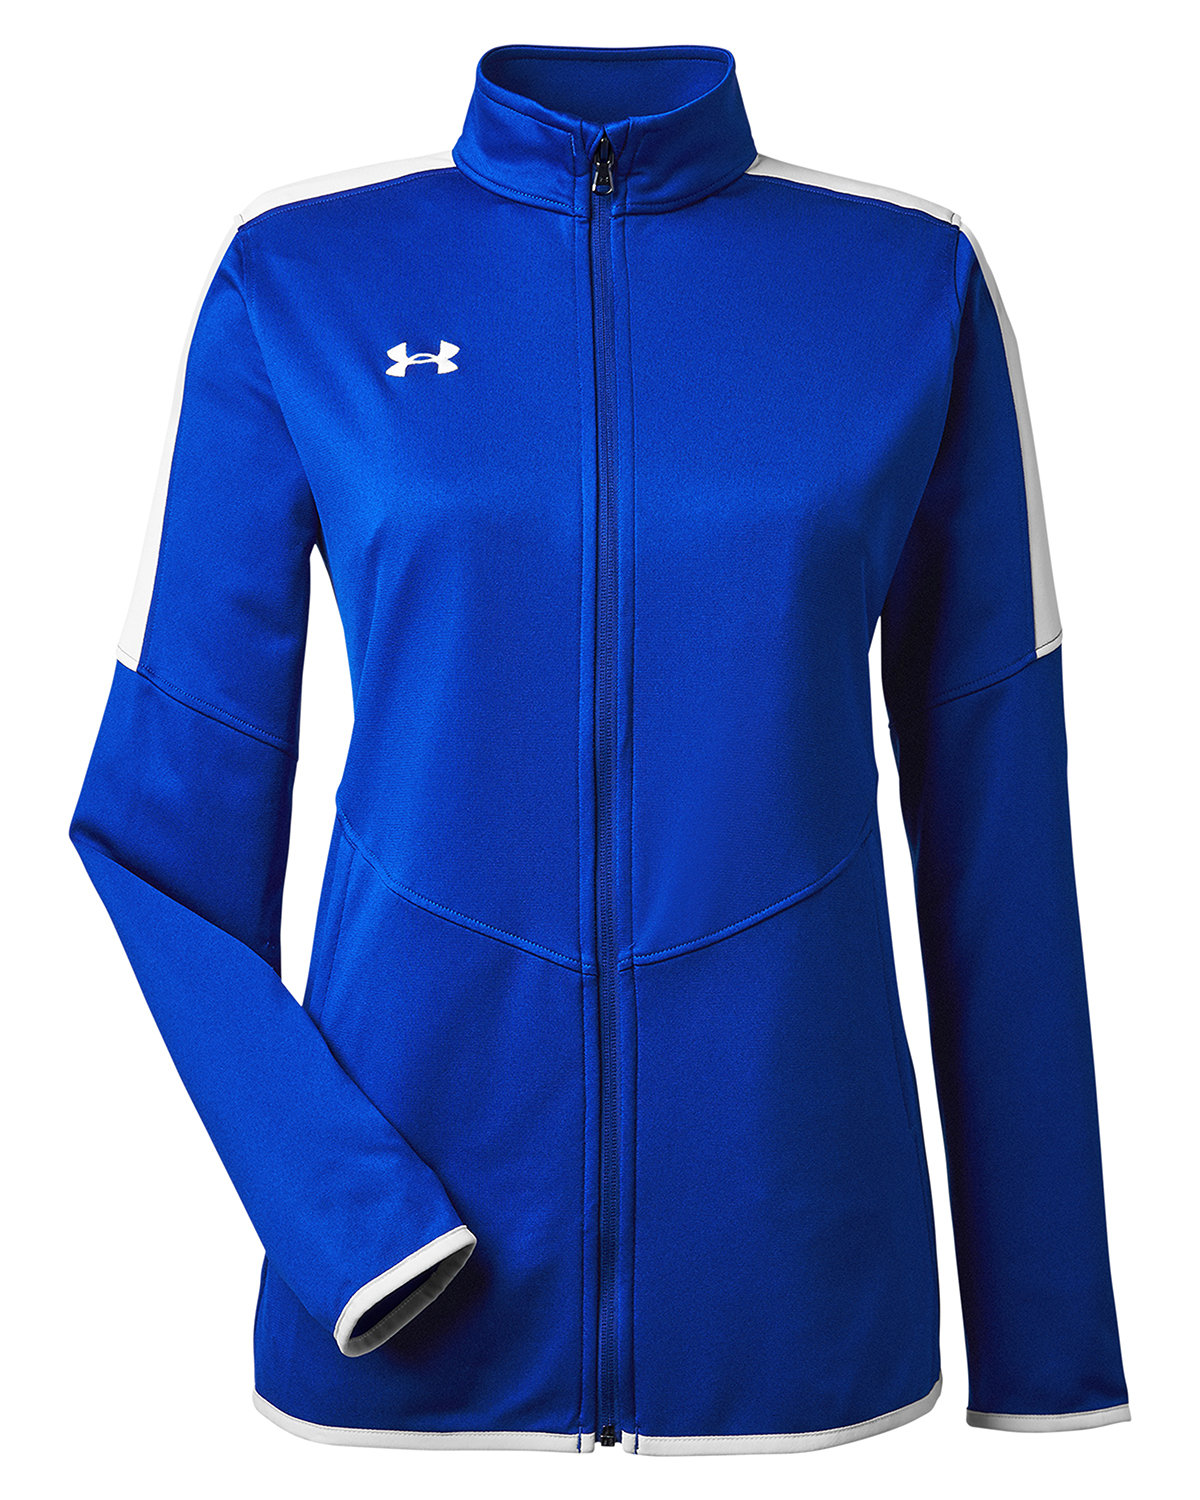 https://www.drivemerch.com/wp-content/uploads/2022/03/branded-under-armour-ladies-rival-knit-jacket-royal.jpg